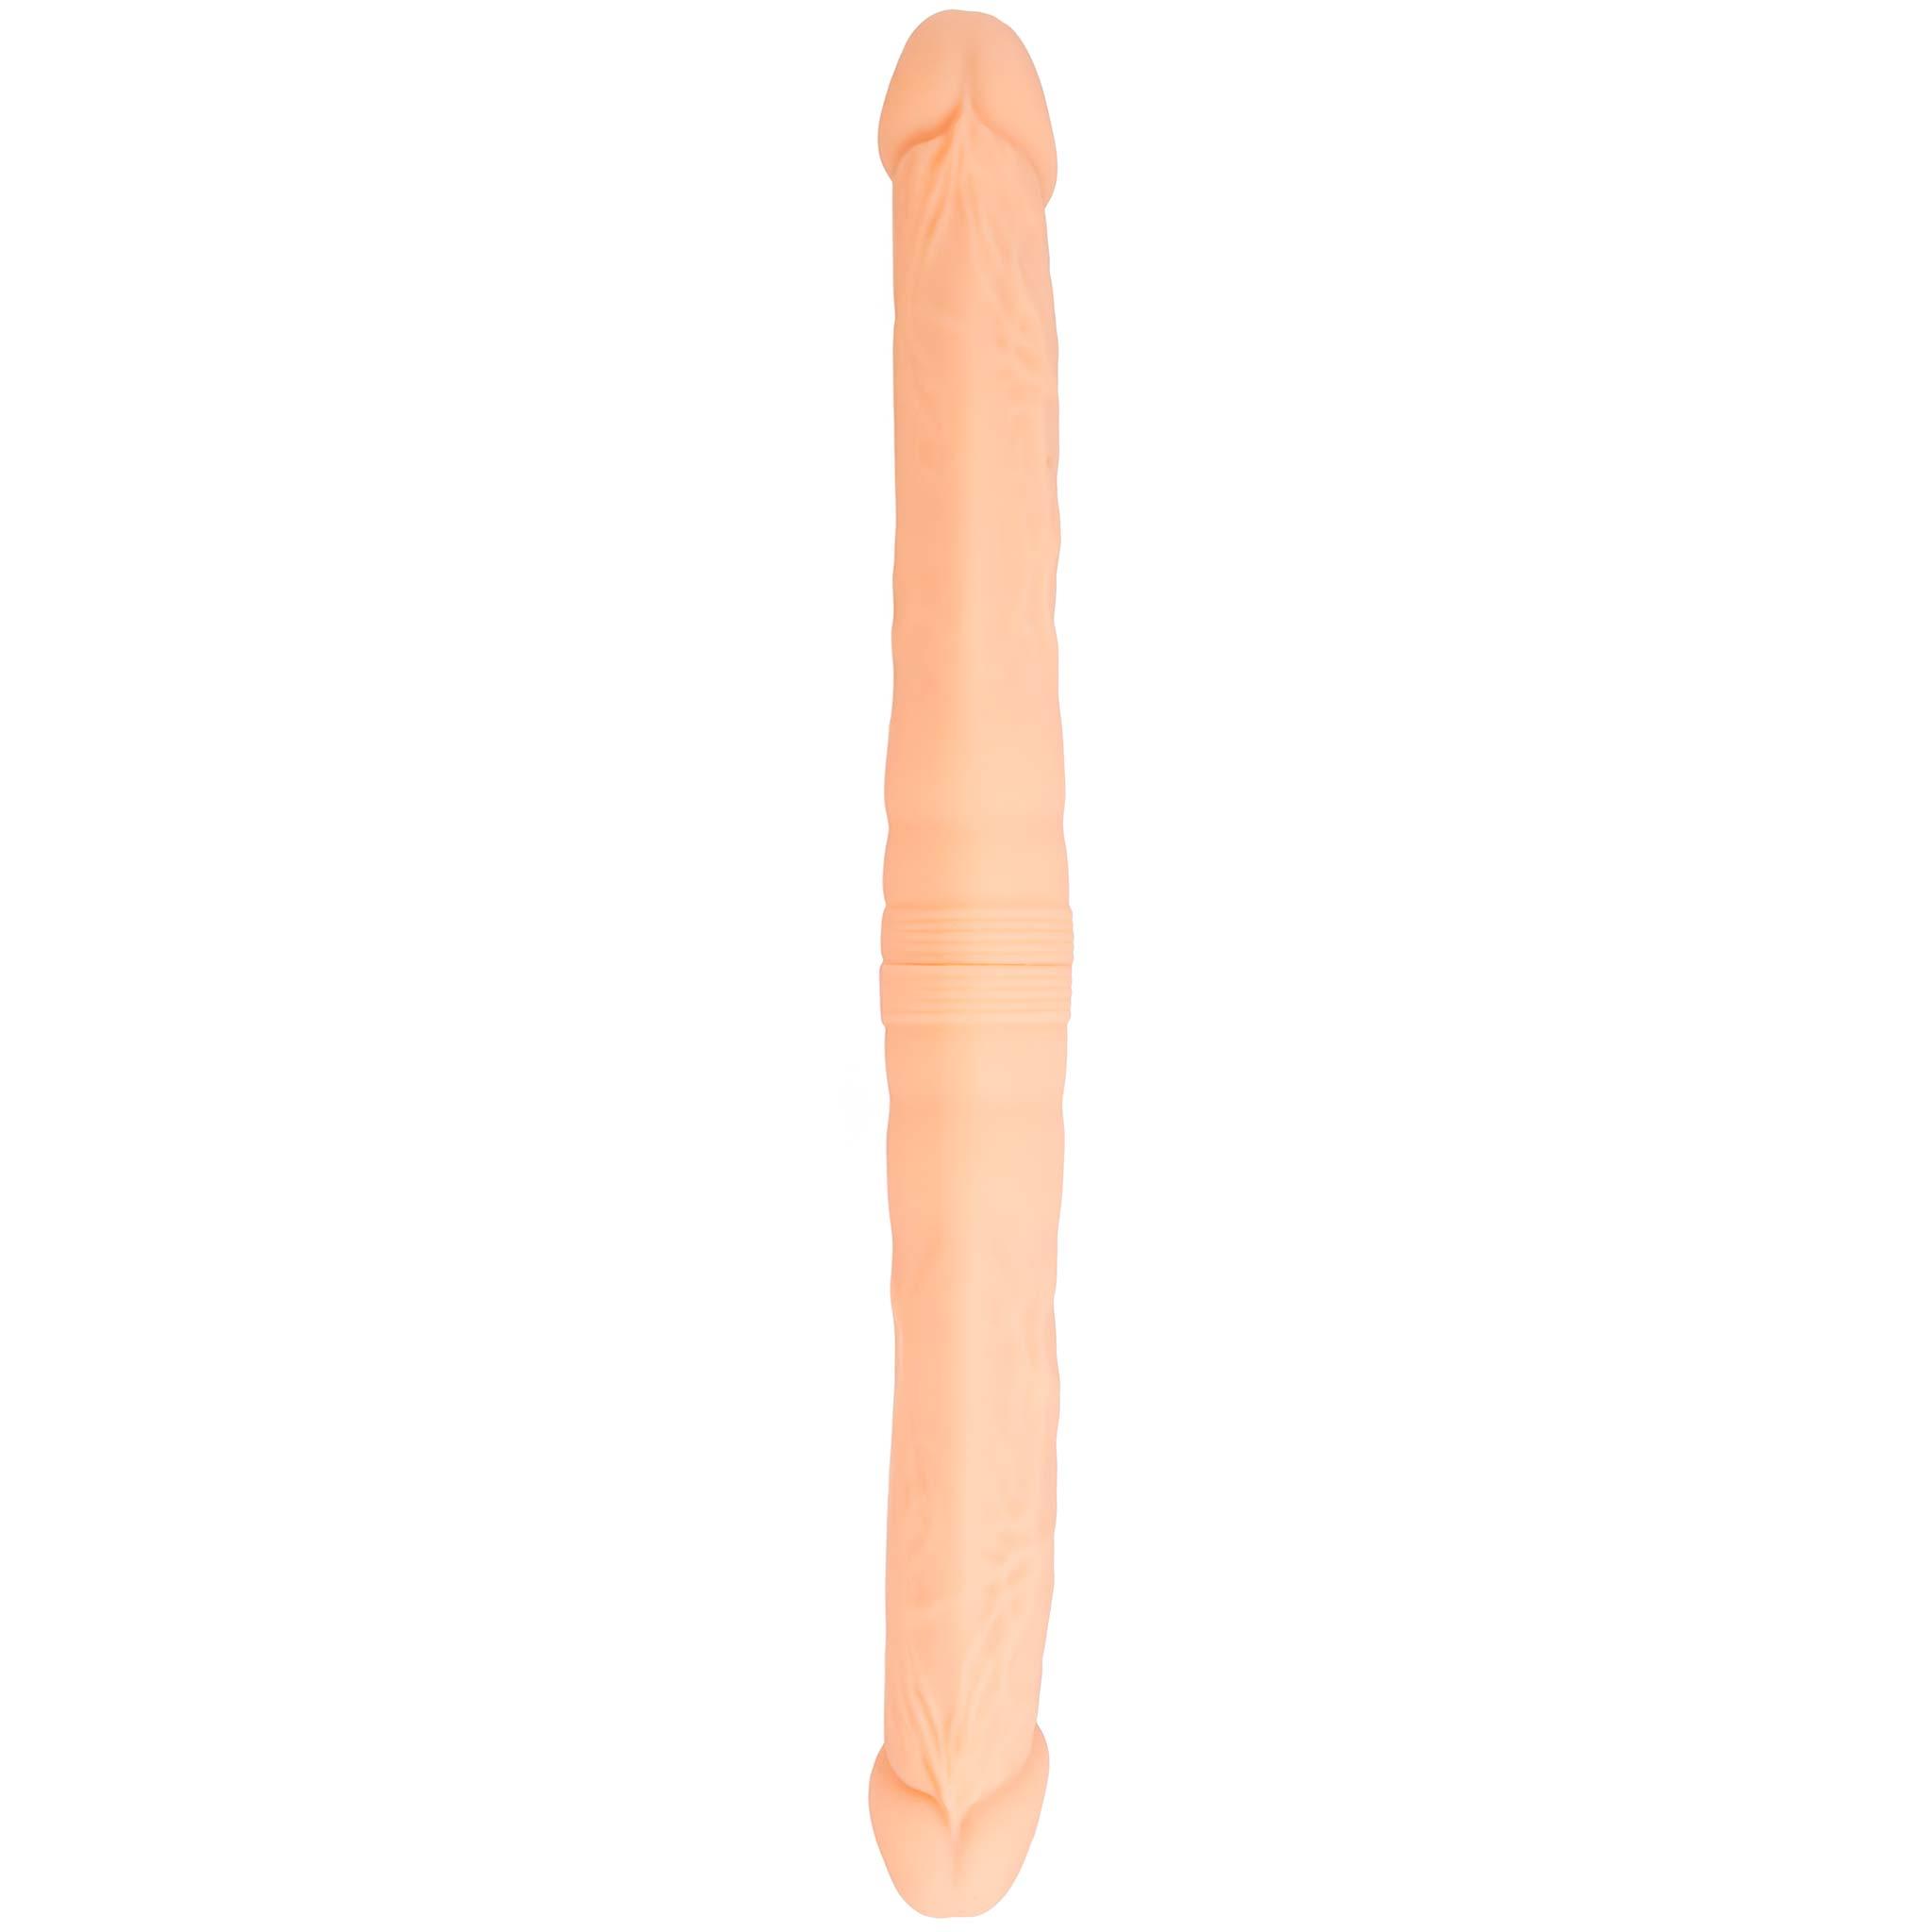 SILEXD Premium Silicone Model 1 Double Dong M, 42 cm, Light skin